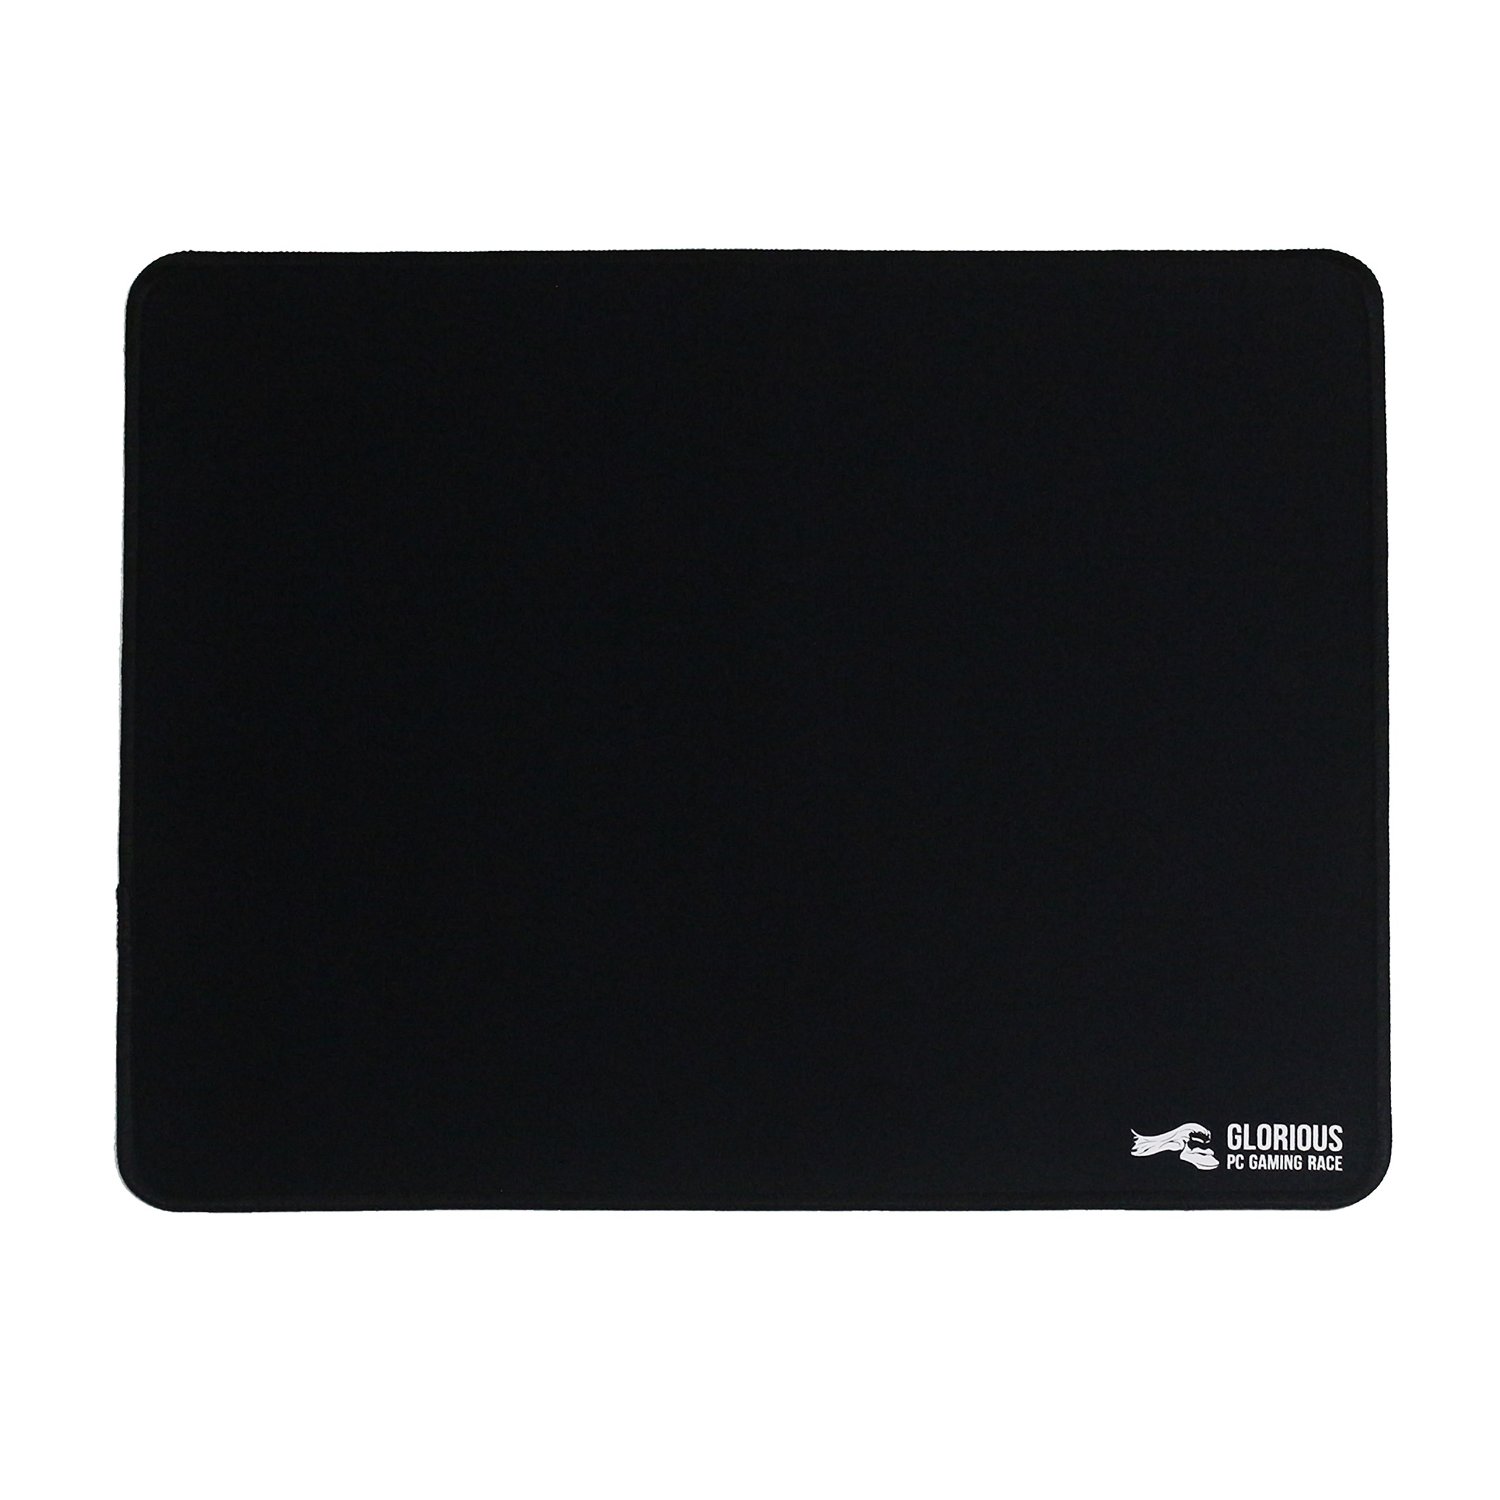 Glorious - Glorious G-L Large Pro Gaming Surface - Black 330x280x2mm